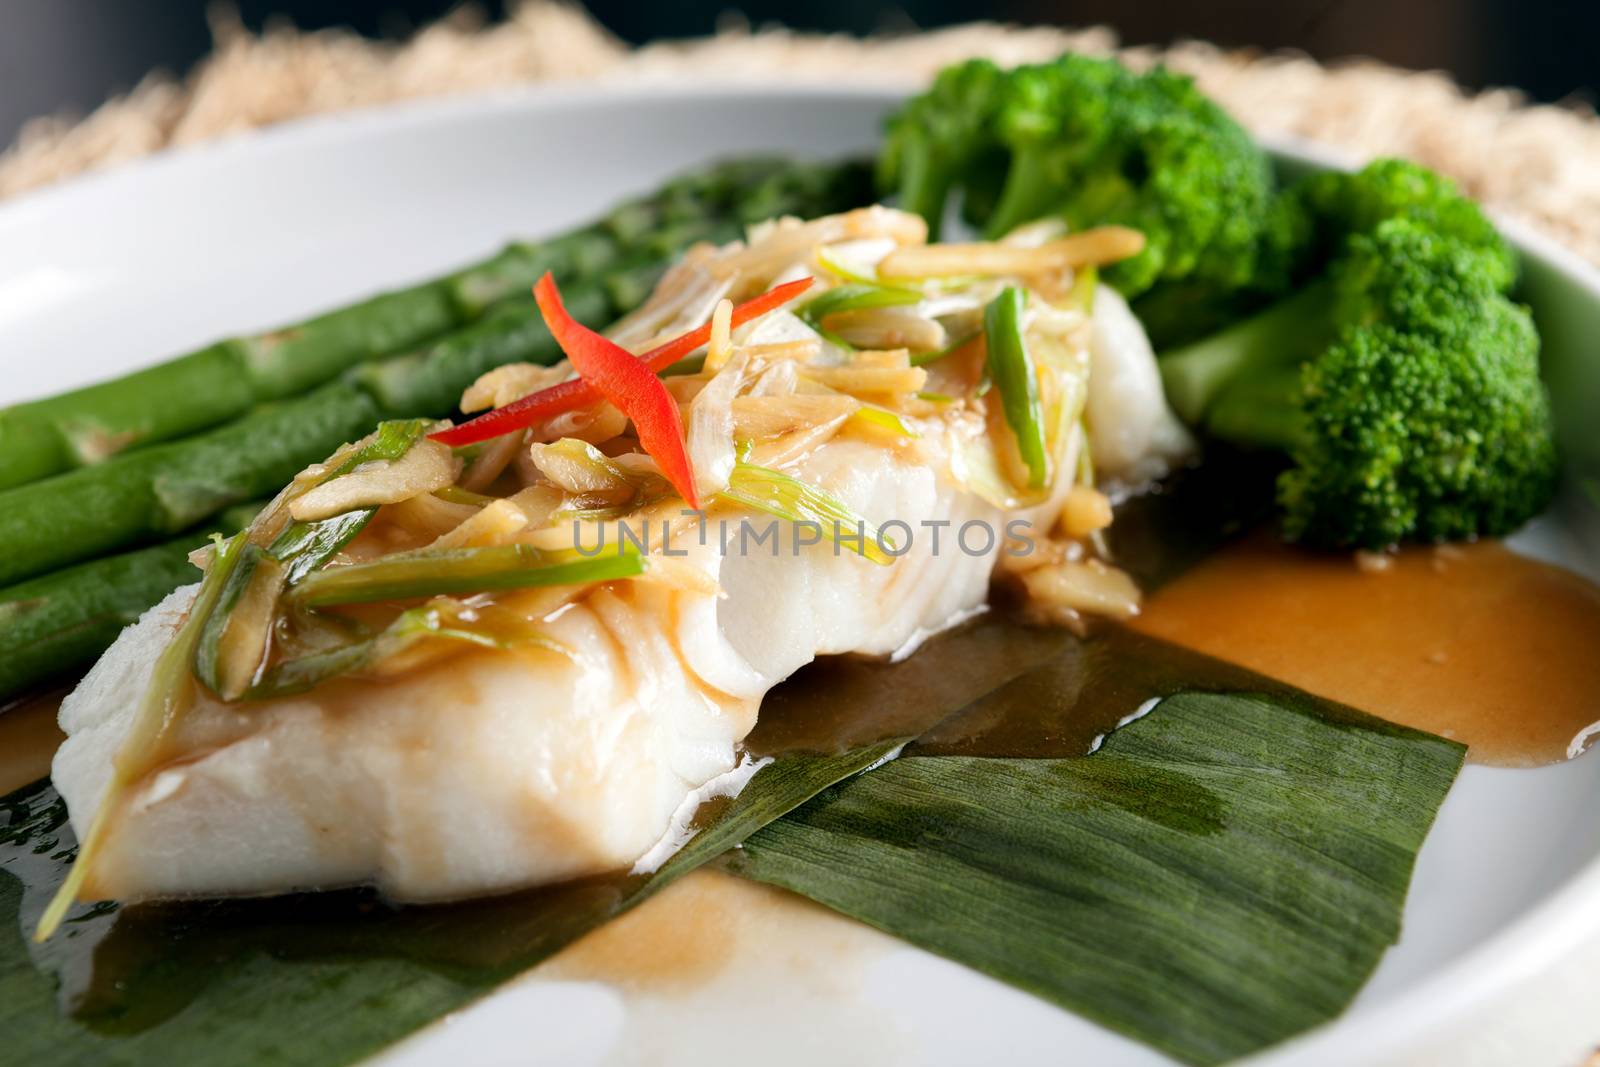 Freshly prepared Thai style sea bass fish dinner with asparagus and appetizer with a contemporary presentation.